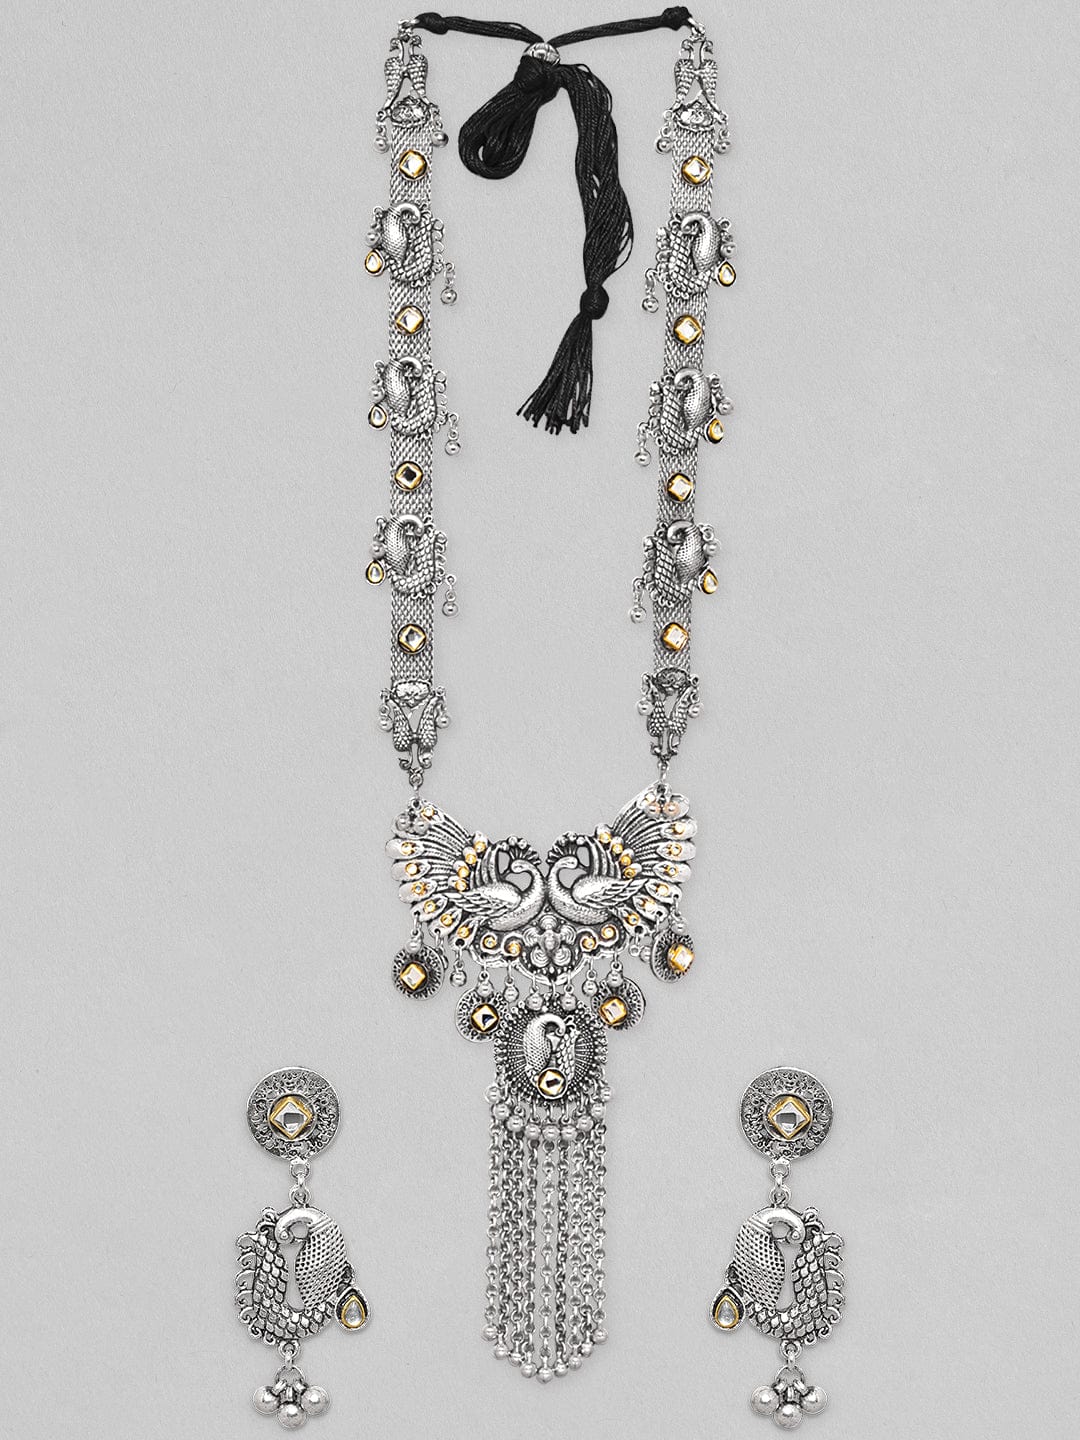 Rubans Oxidized Silver Plated Peacock Motif With Tassels Long Necklace Set Necklace Set